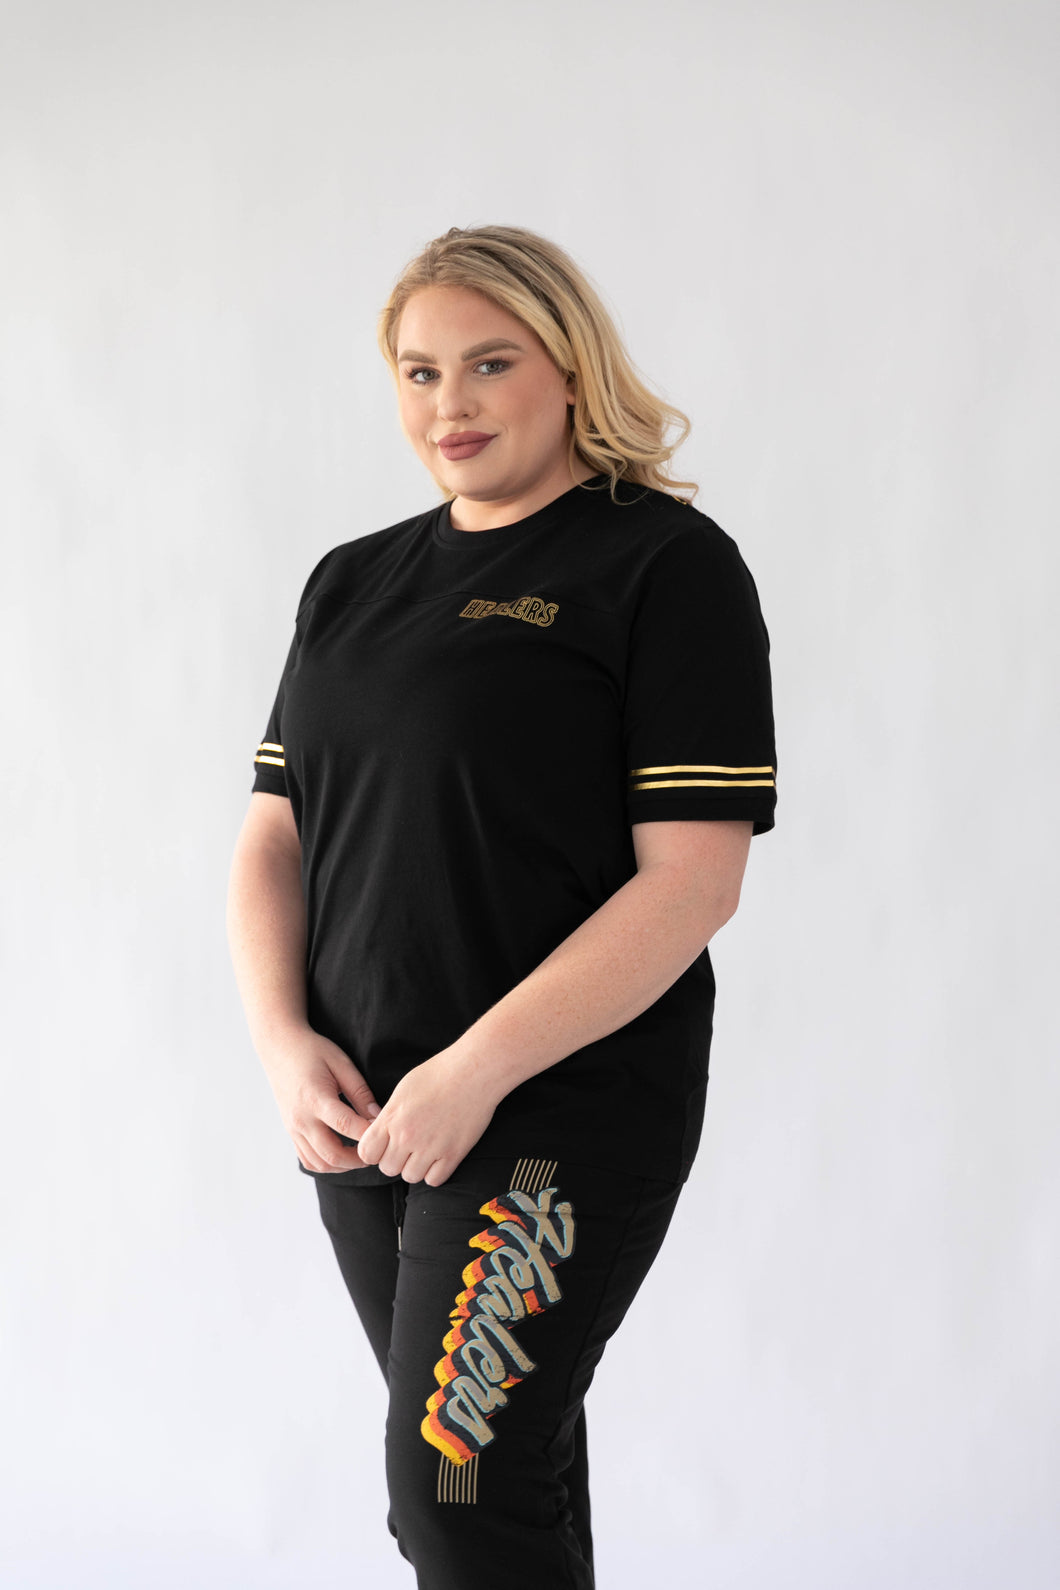 Healers X Staydium Staff Tee in Black with Gold Foil Print